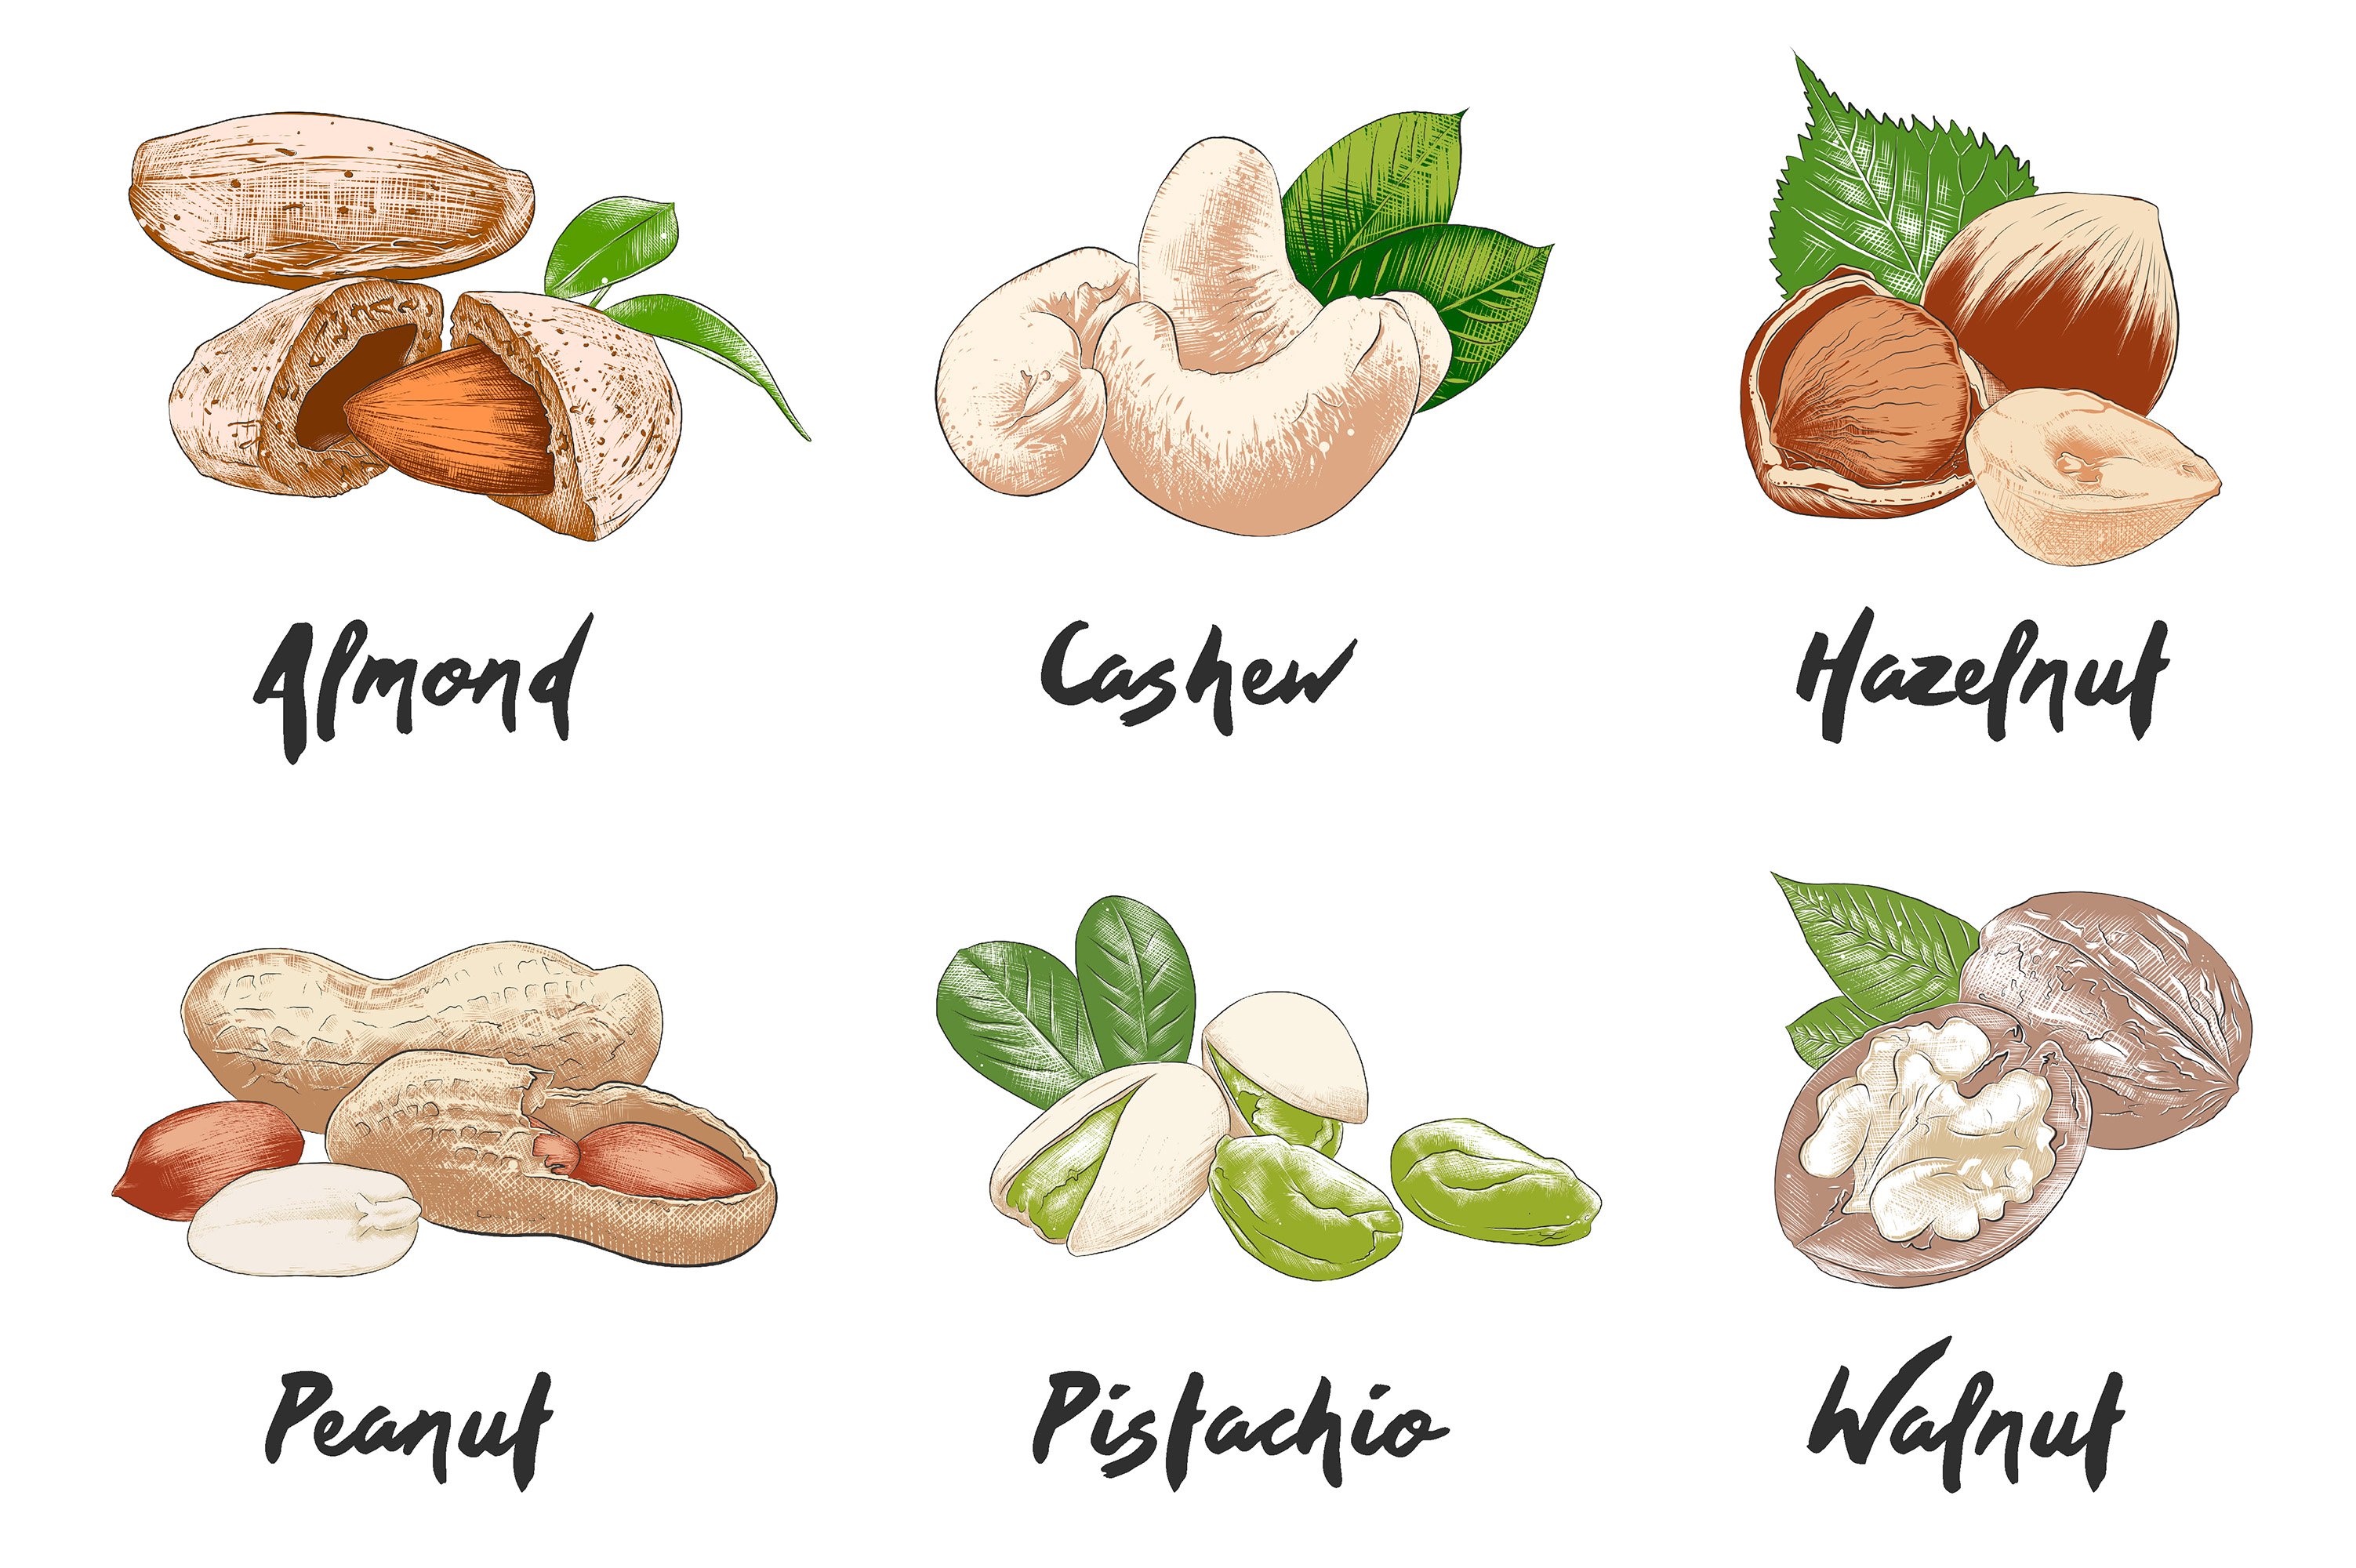 A bunch of nuts that are labeled in different languages.